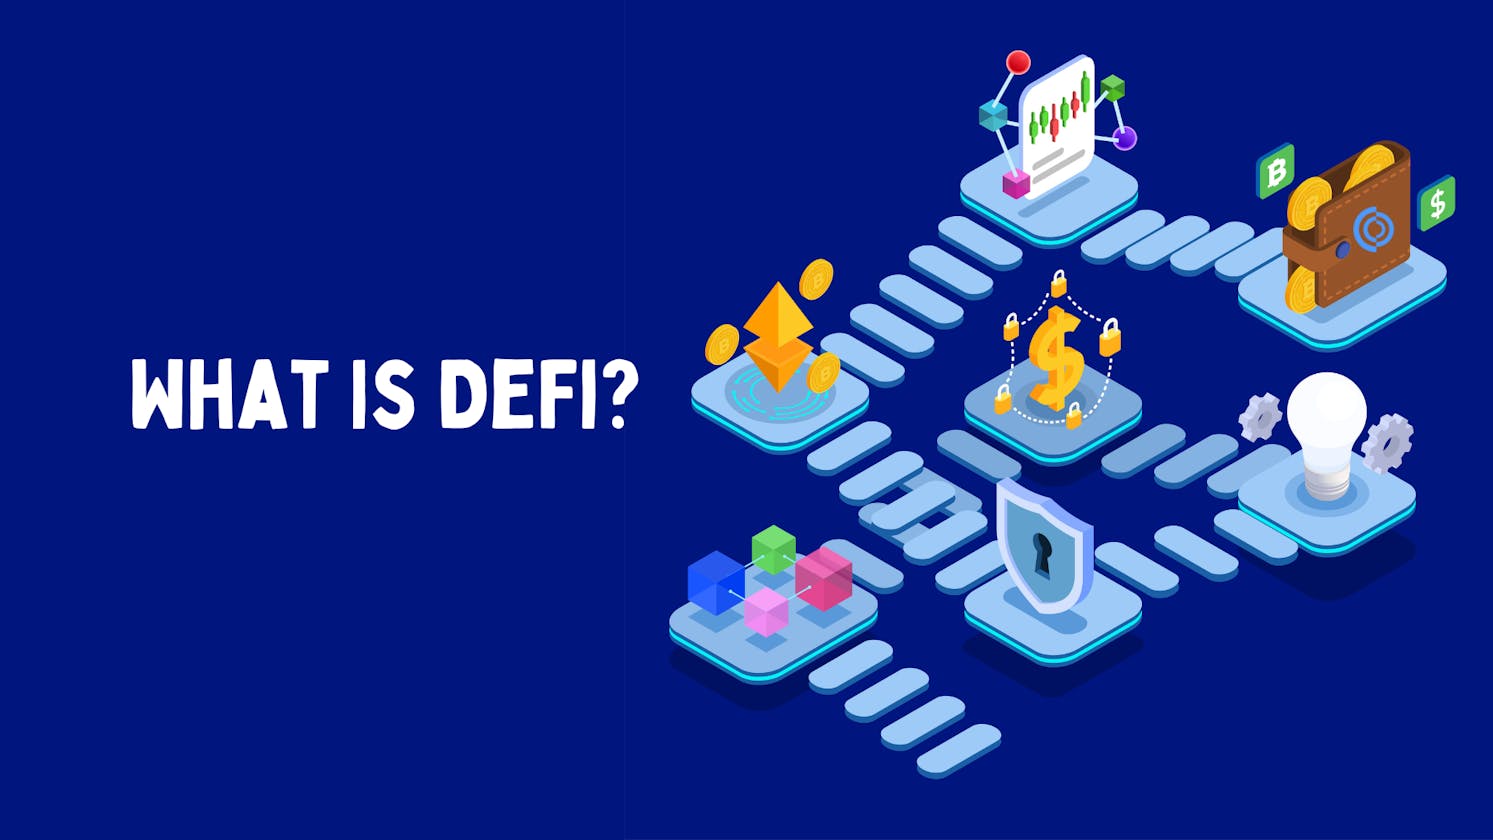 What is (Decentralized Finance)DeFi?